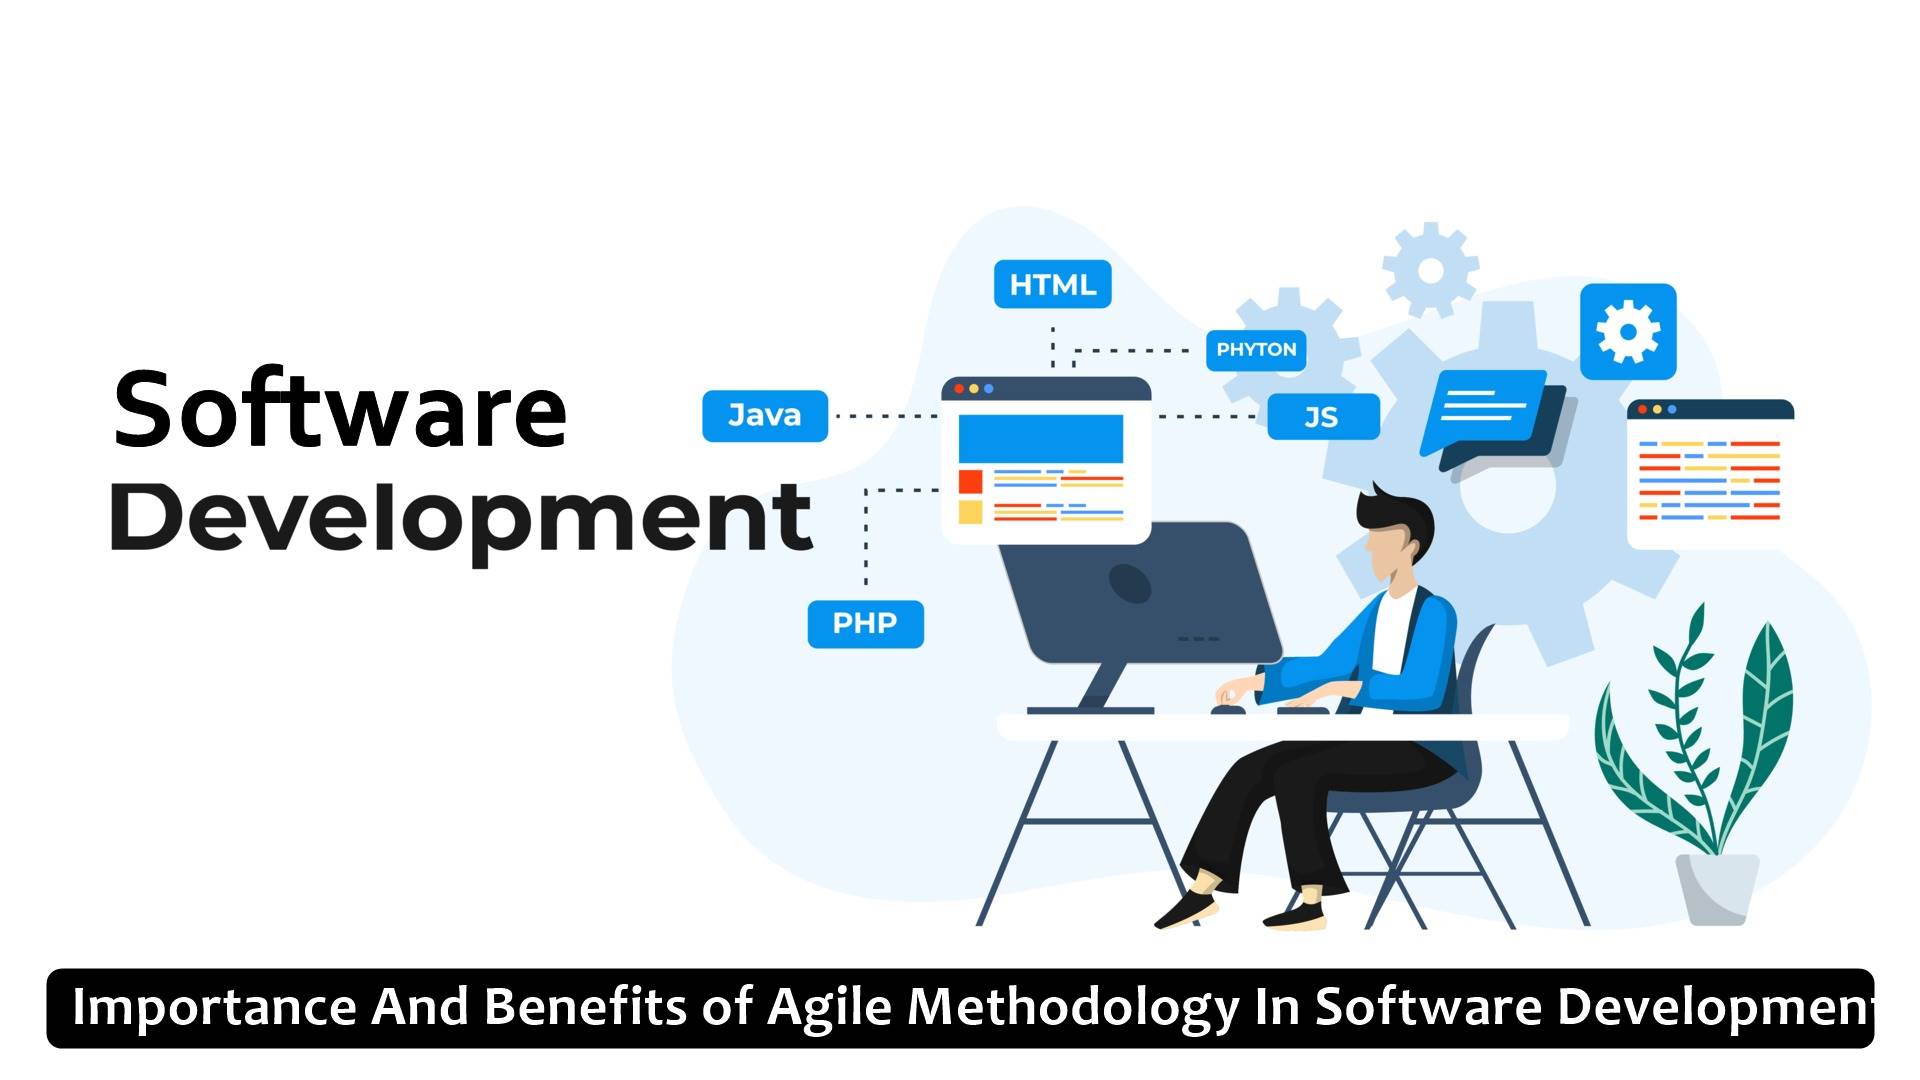 Importance And Benefits of Agile Methodology In Software Development